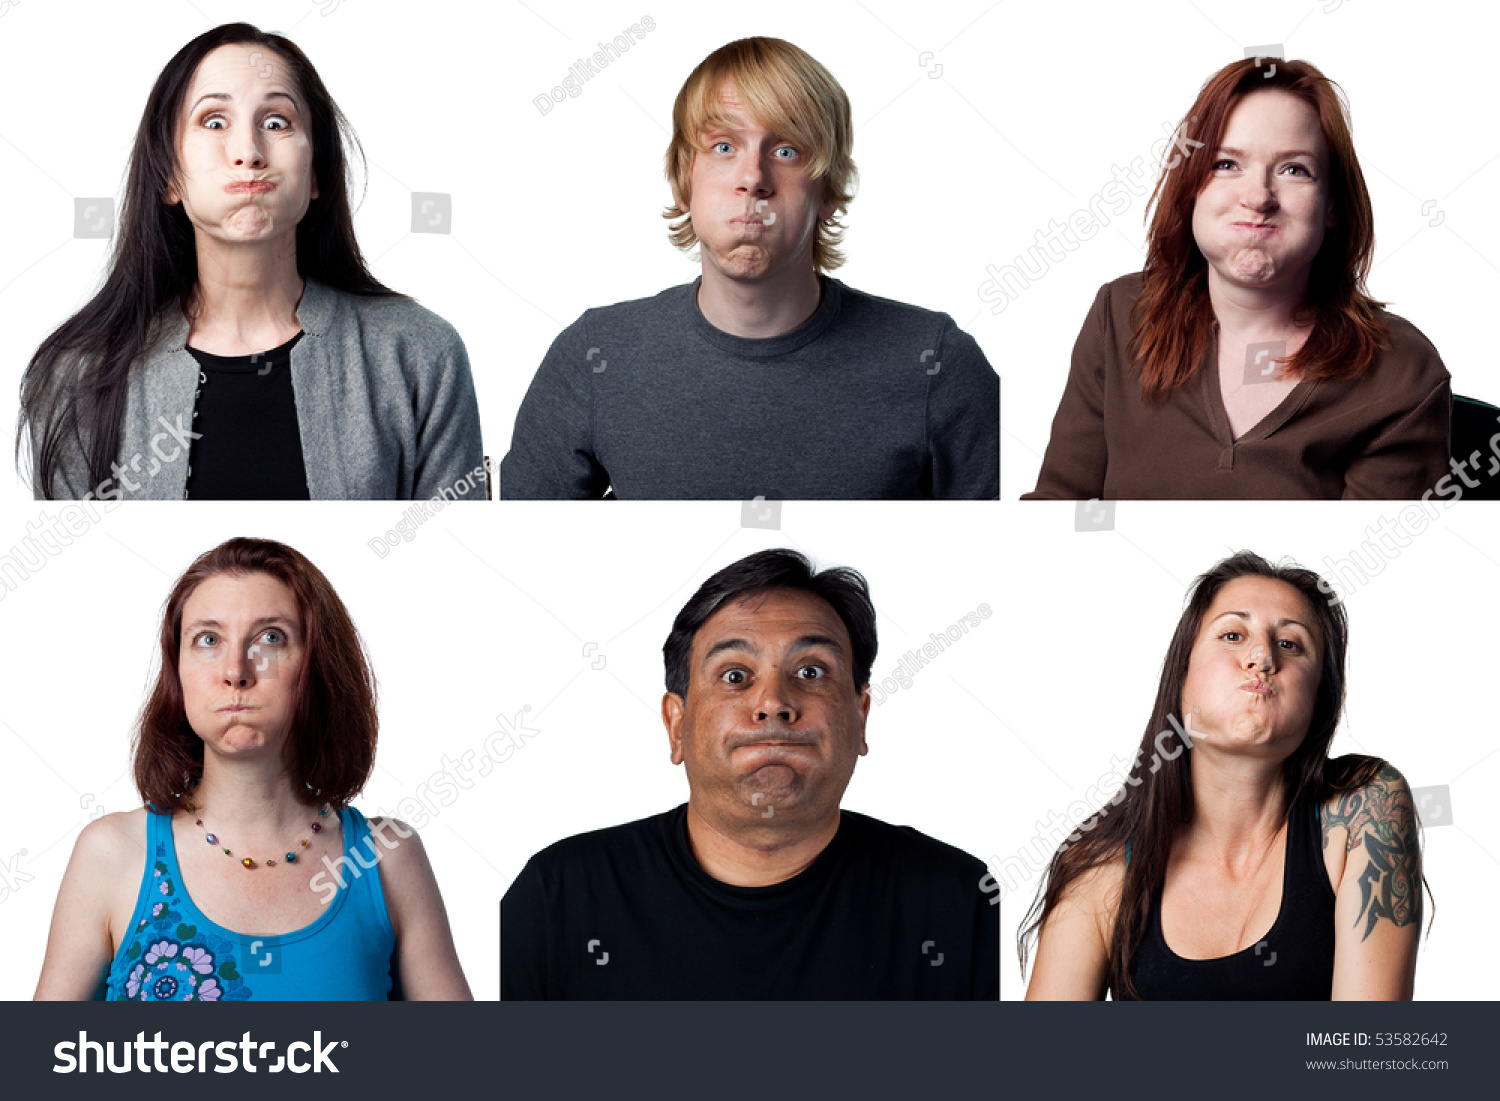 Group People Making Funny Faces Camera Stock Photo 53582642 - Shutterstock